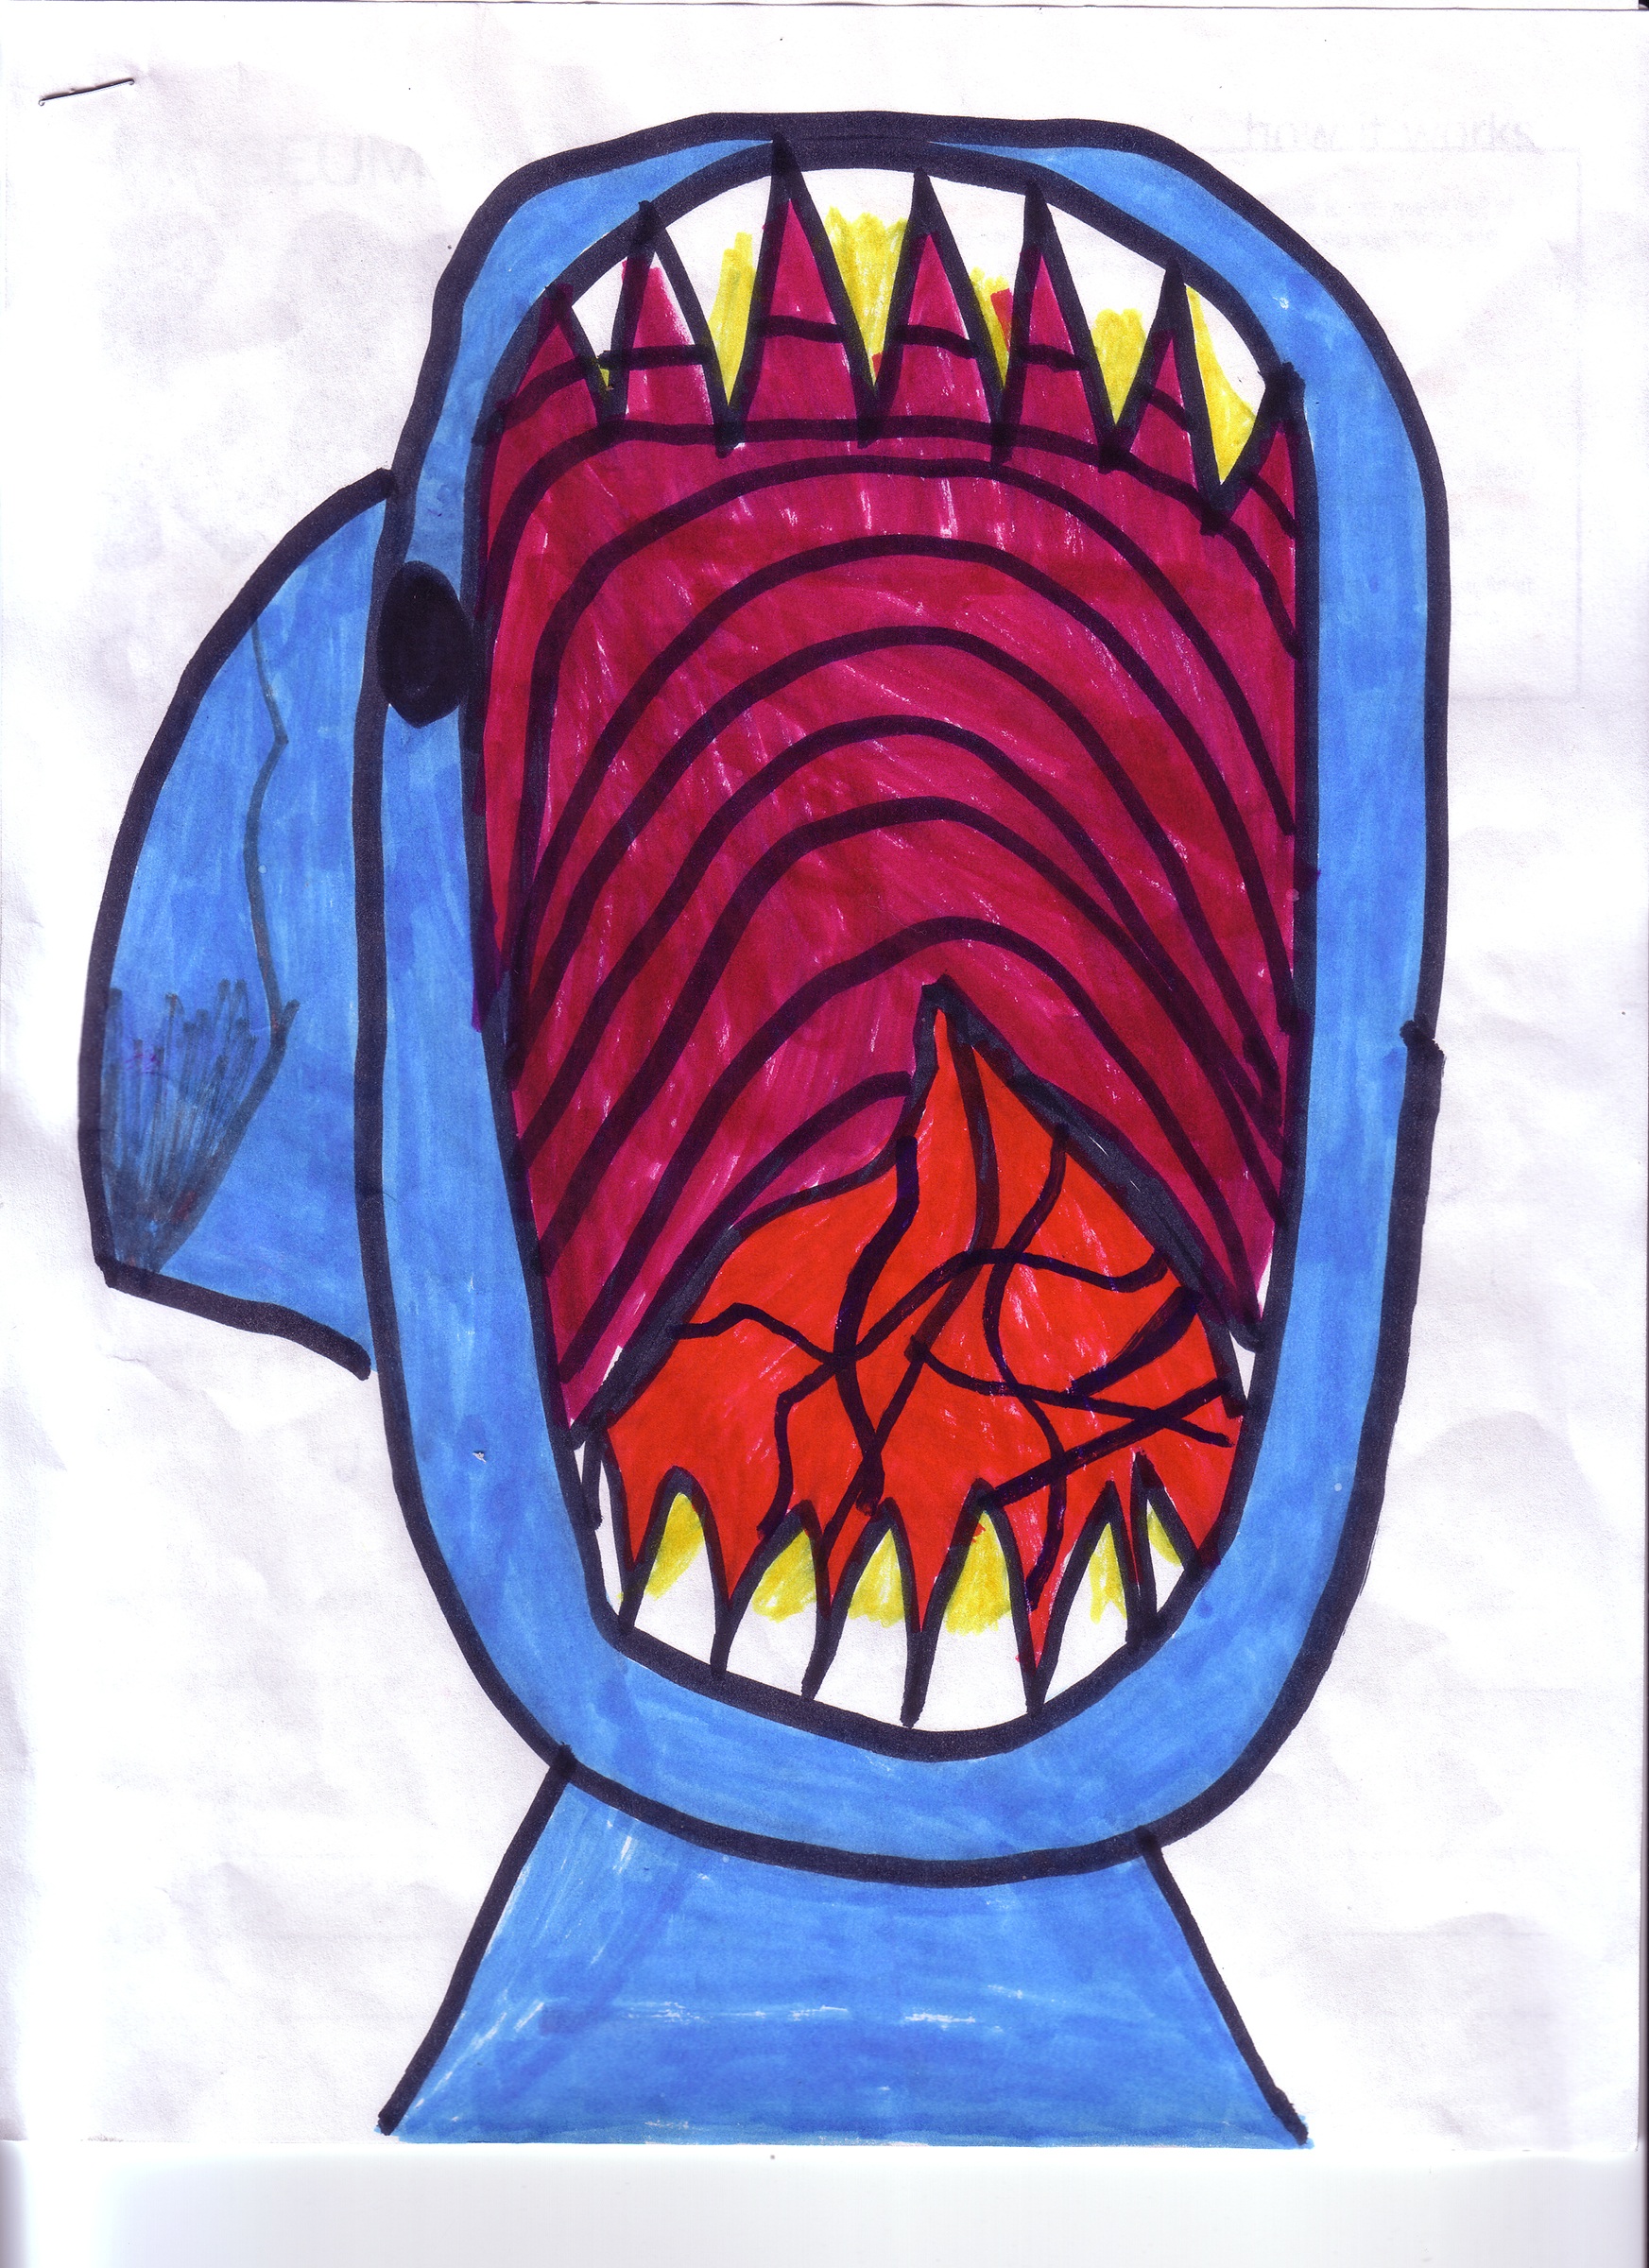  Erica Hankins (age 8).&nbsp; Shark Attack!,  2007.&nbsp;Ink on paper;&nbsp;11 x 8 1/2 in.&nbsp;Collection of Museum of Glass, Tacoma, Washington.   Shark Attack!  artist’s statement:  It’s scary! 